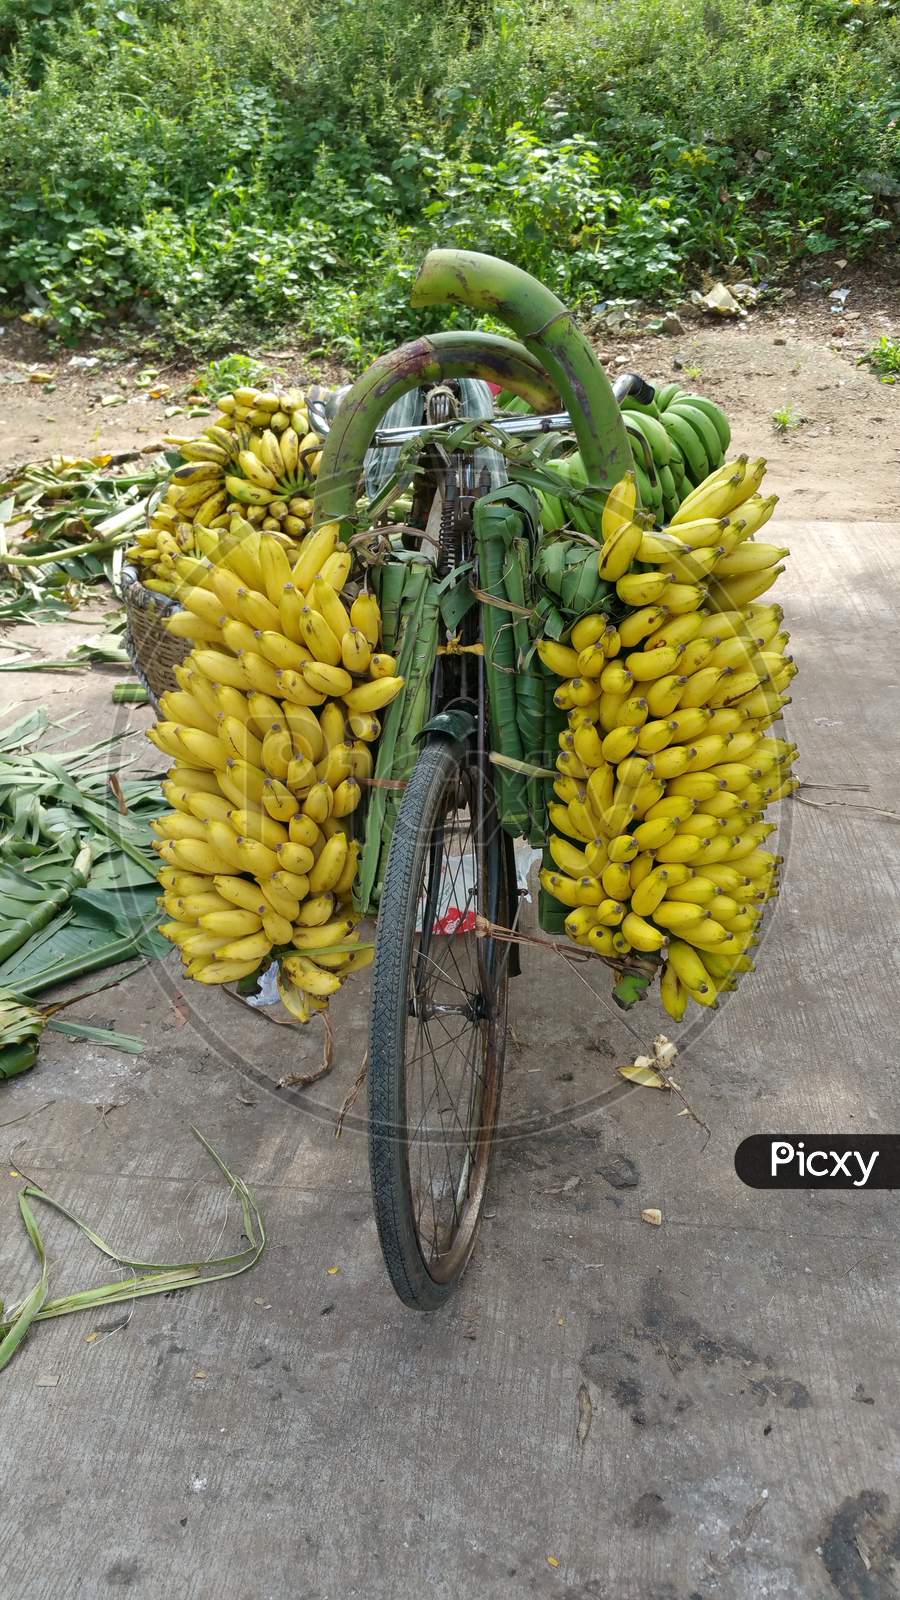 Bananas tied up to a bicycle